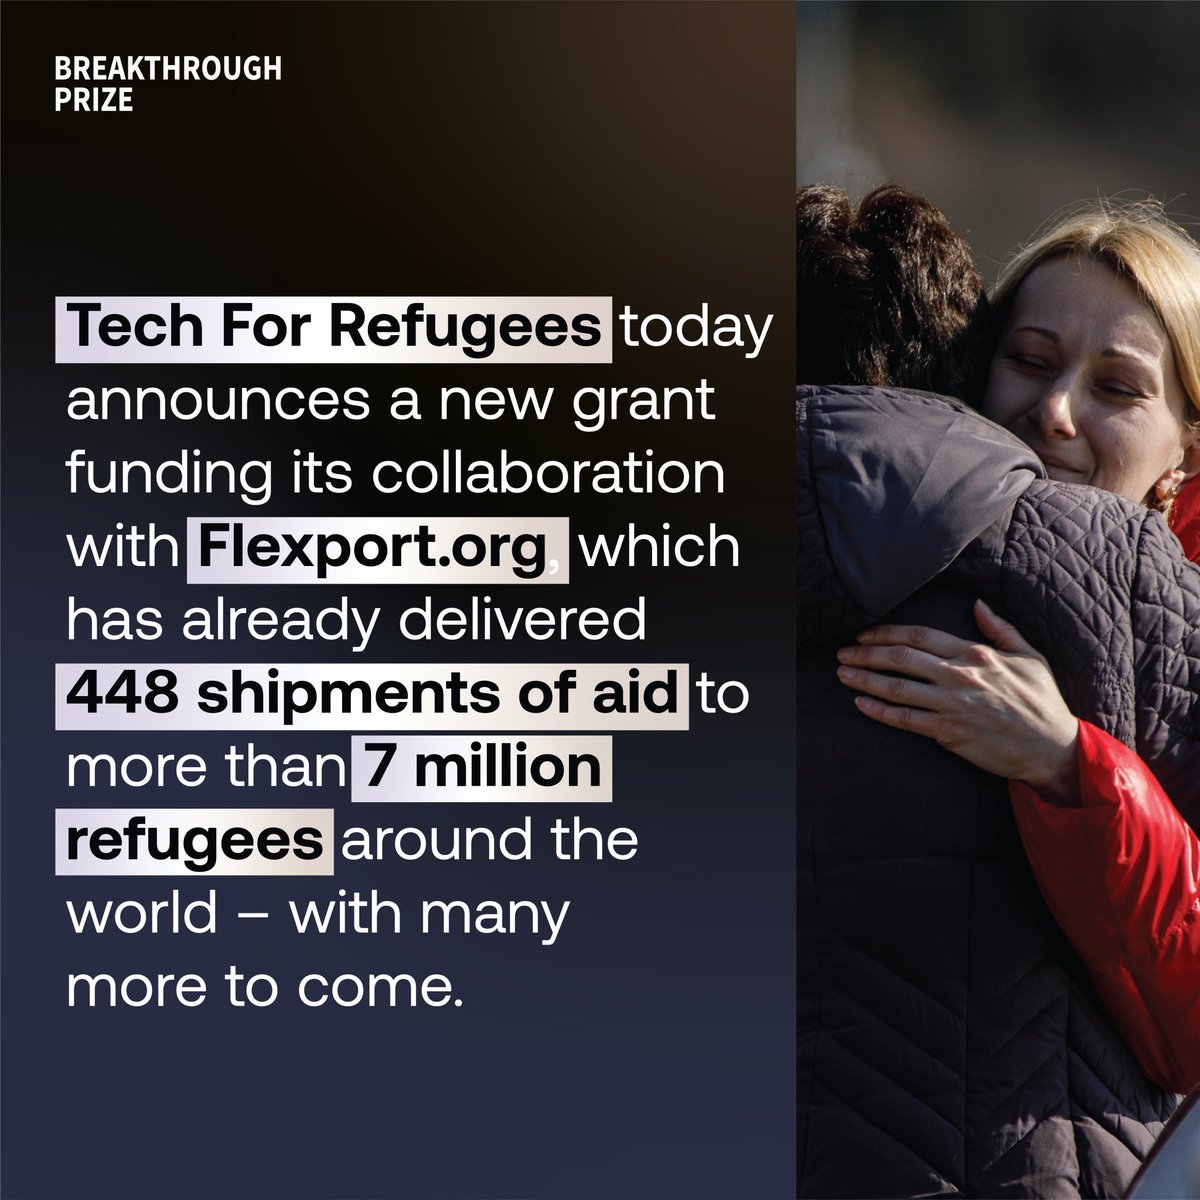 Donations from Tech for Refugees, a non profit set up by Yuri Milner, have enabled Flexport.org to deliver humanitarian aid for more than 7 million refugees since the start of the Ukraine war in 2022.